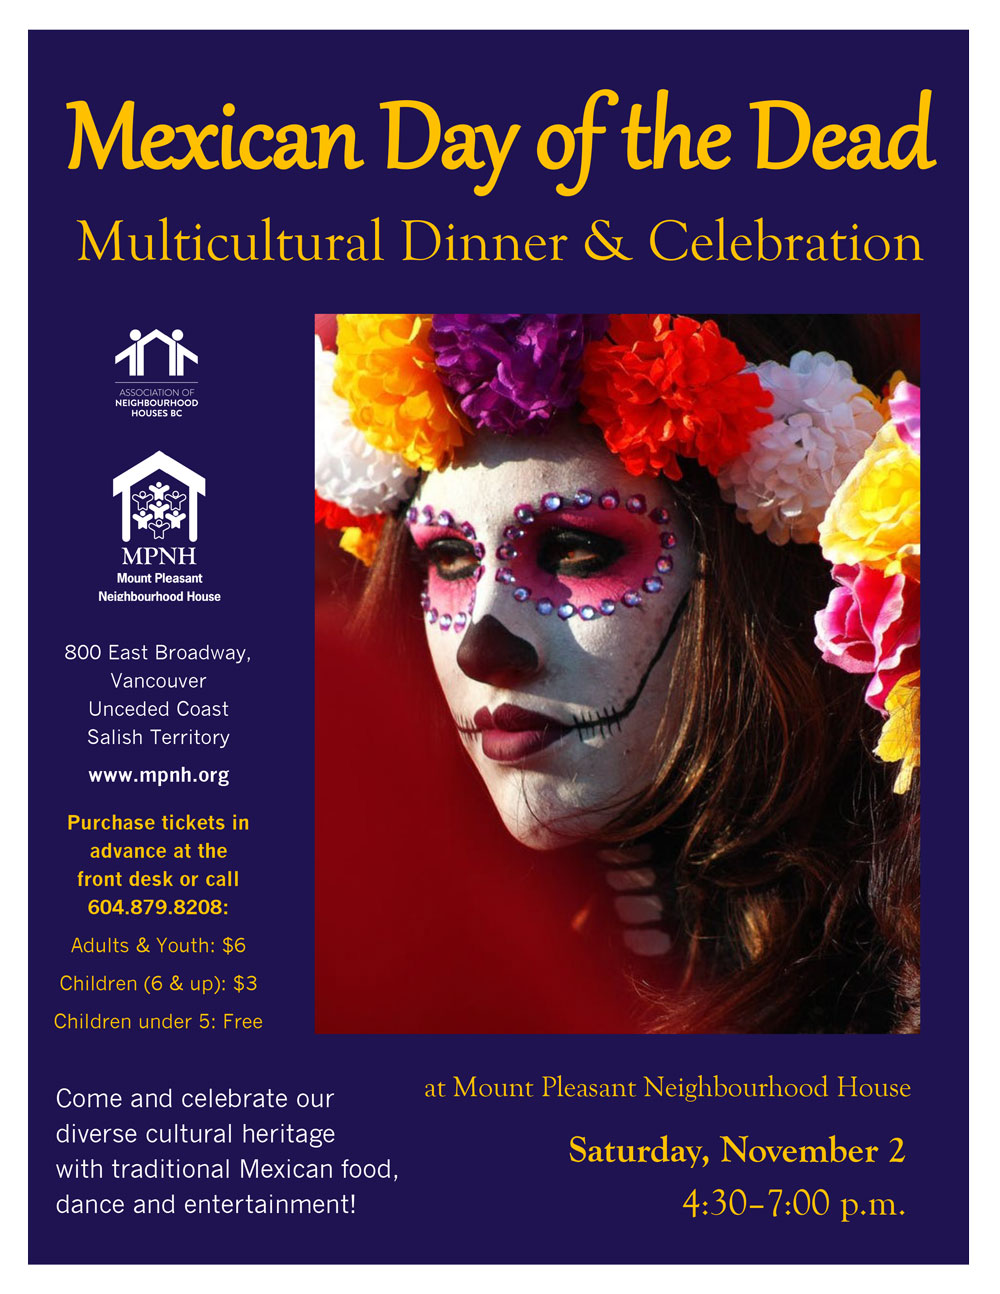 An image of the poster with event details, featuring a photo of a woman's face painted like a skeleton, with jewels around her eyes and brightly coloured flowers in her hair.